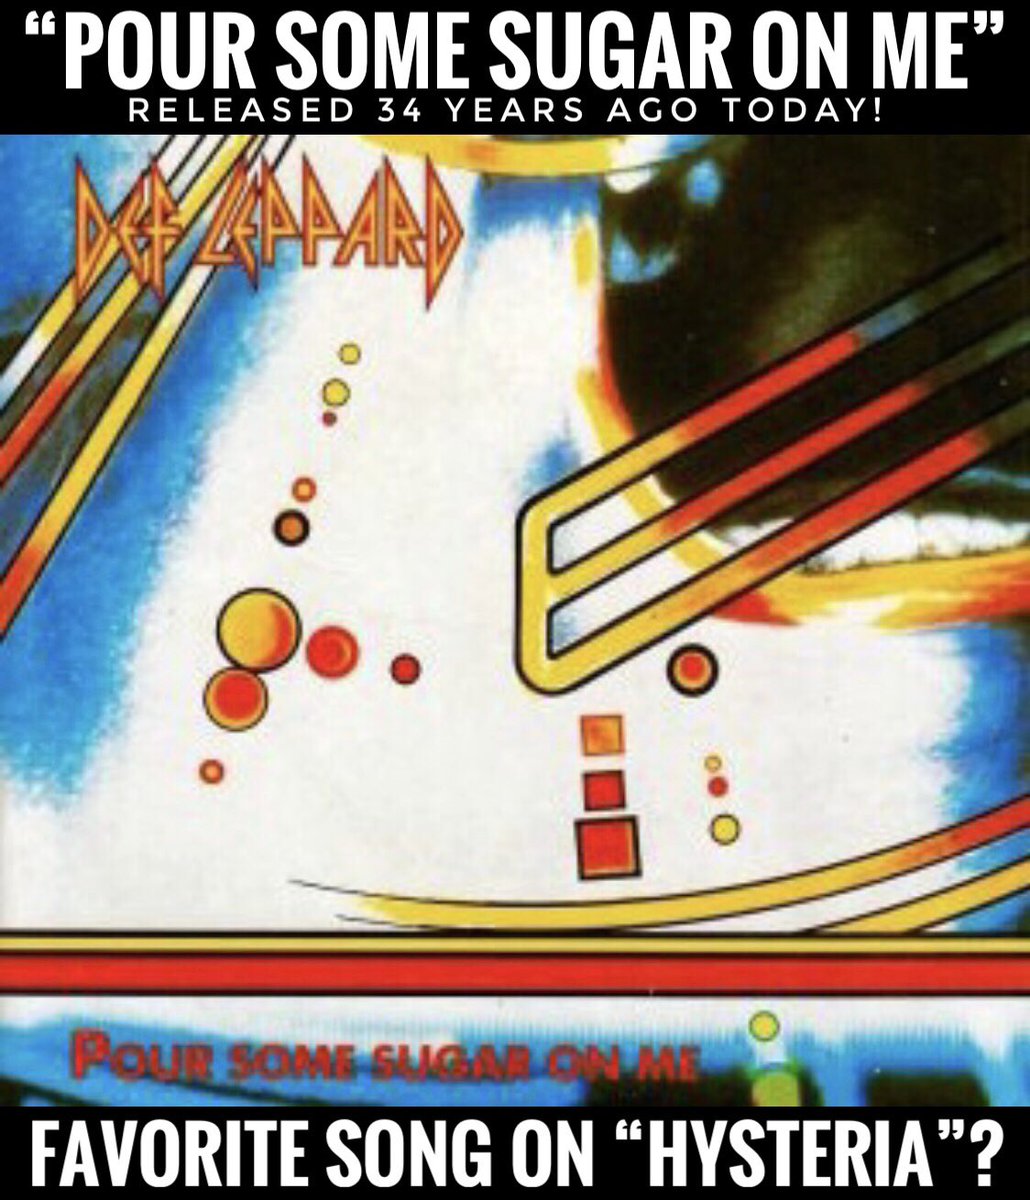 What was your favorite song?
#hysteria #defleppard #80smusic #80srock #hairnation #poursomesugaronme 

podcasts.apple.com/us/podcast/sur…